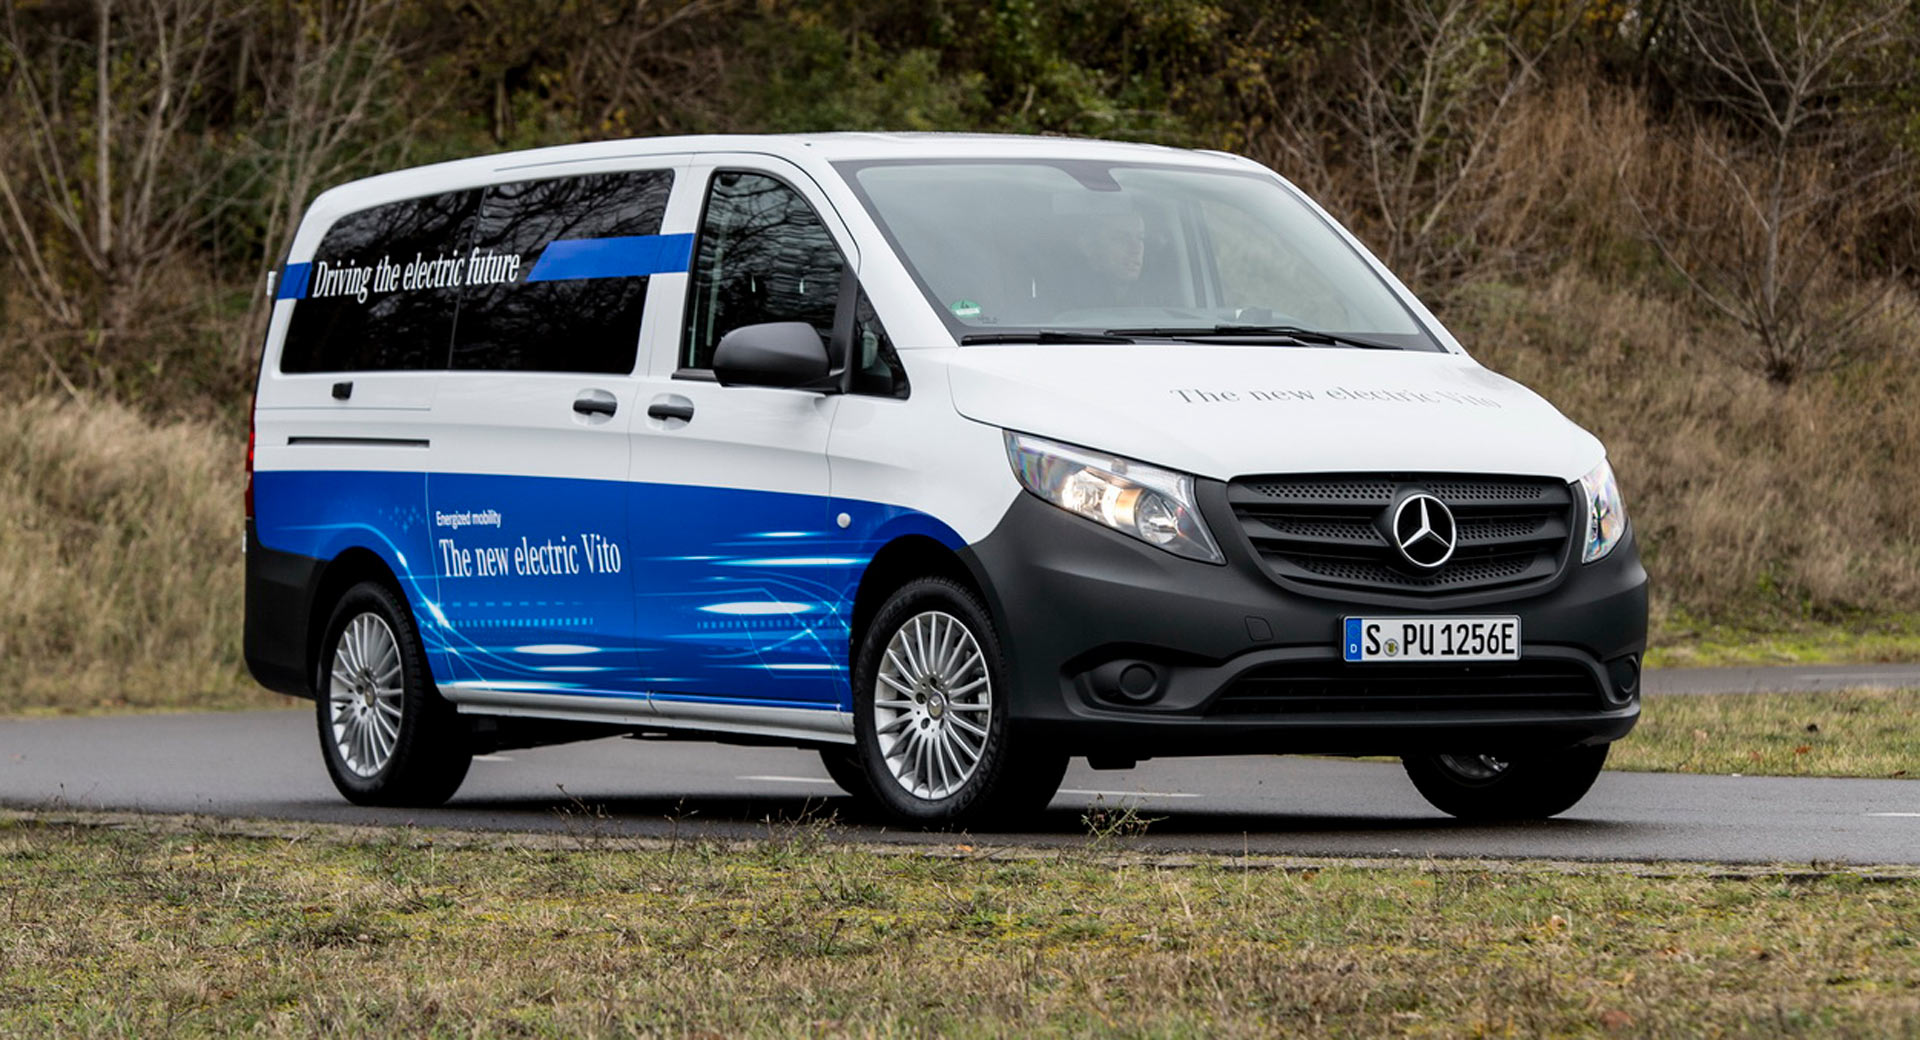 Mercedes V-Class facelift: fully-electric version to debut at Geneva